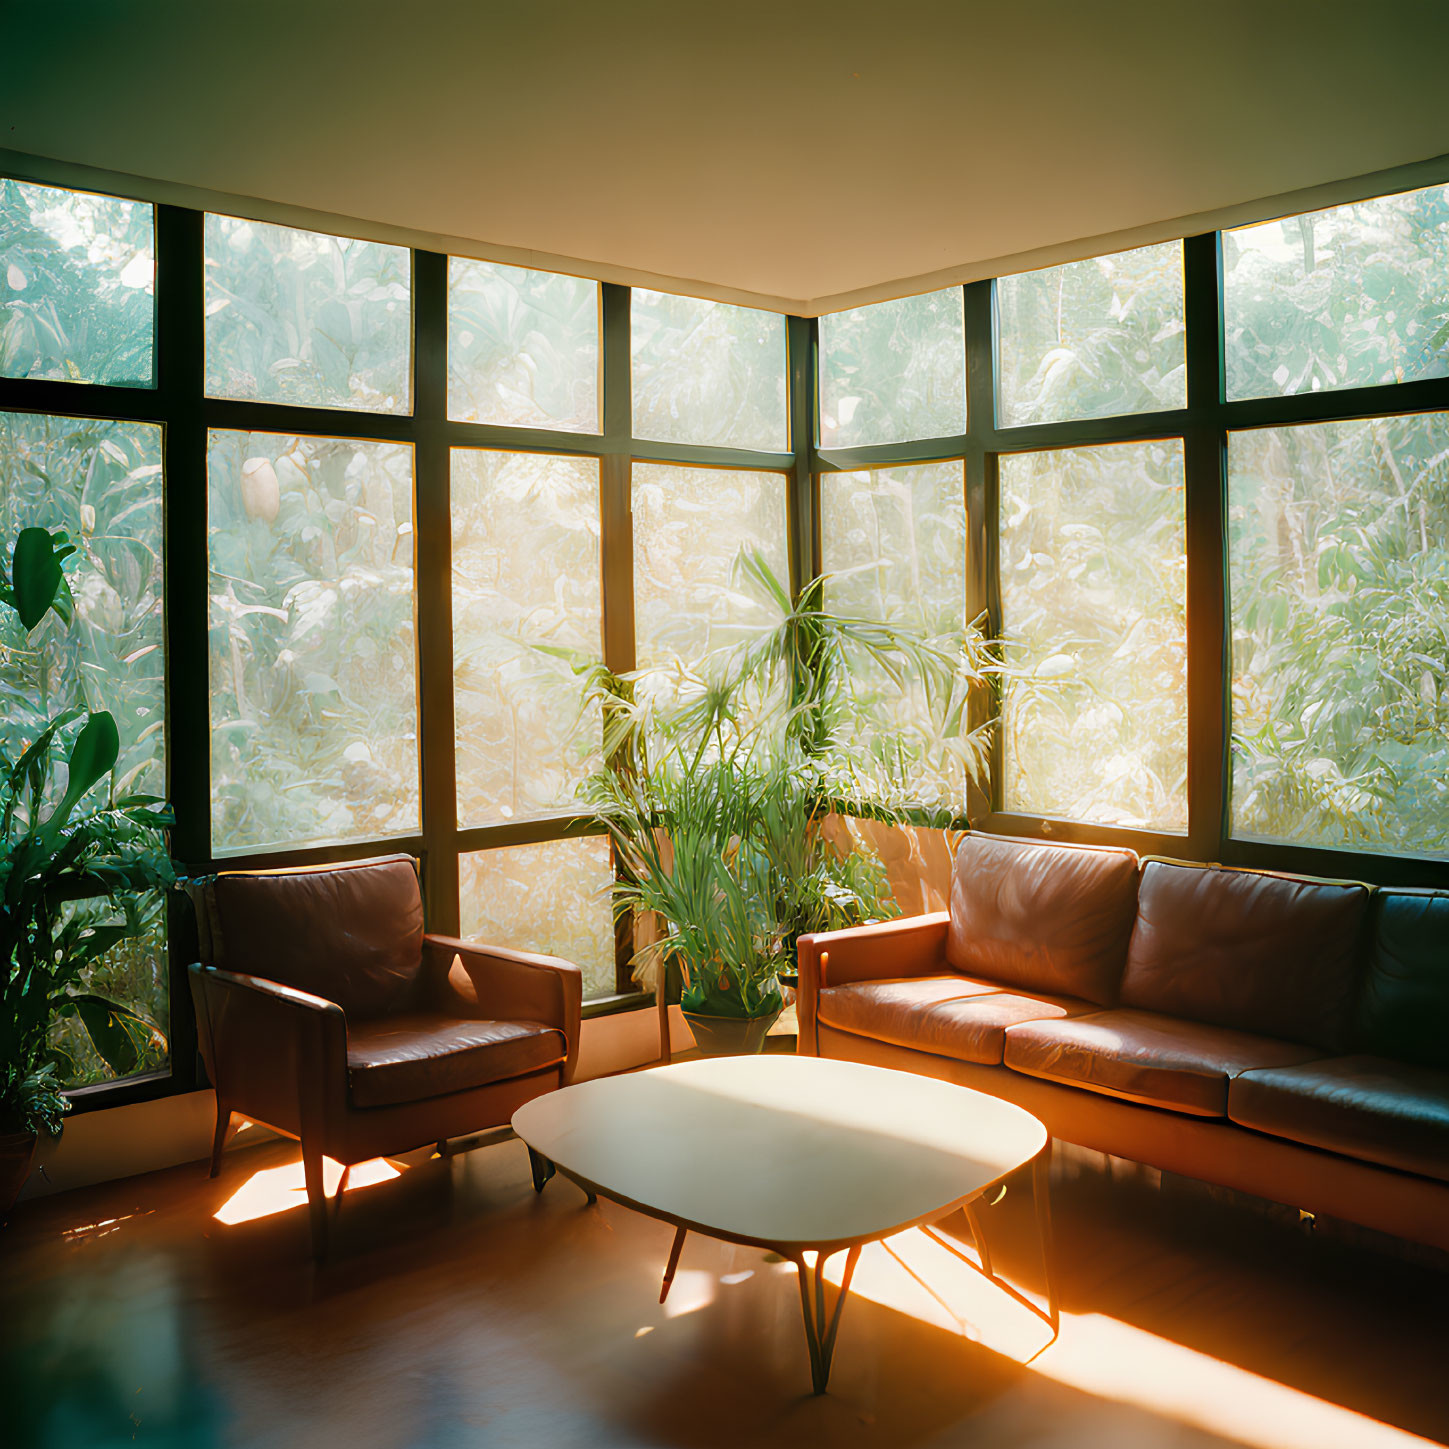 Sunlit room with glass walls, brown leather sofa, armchair, white coffee table & lush green